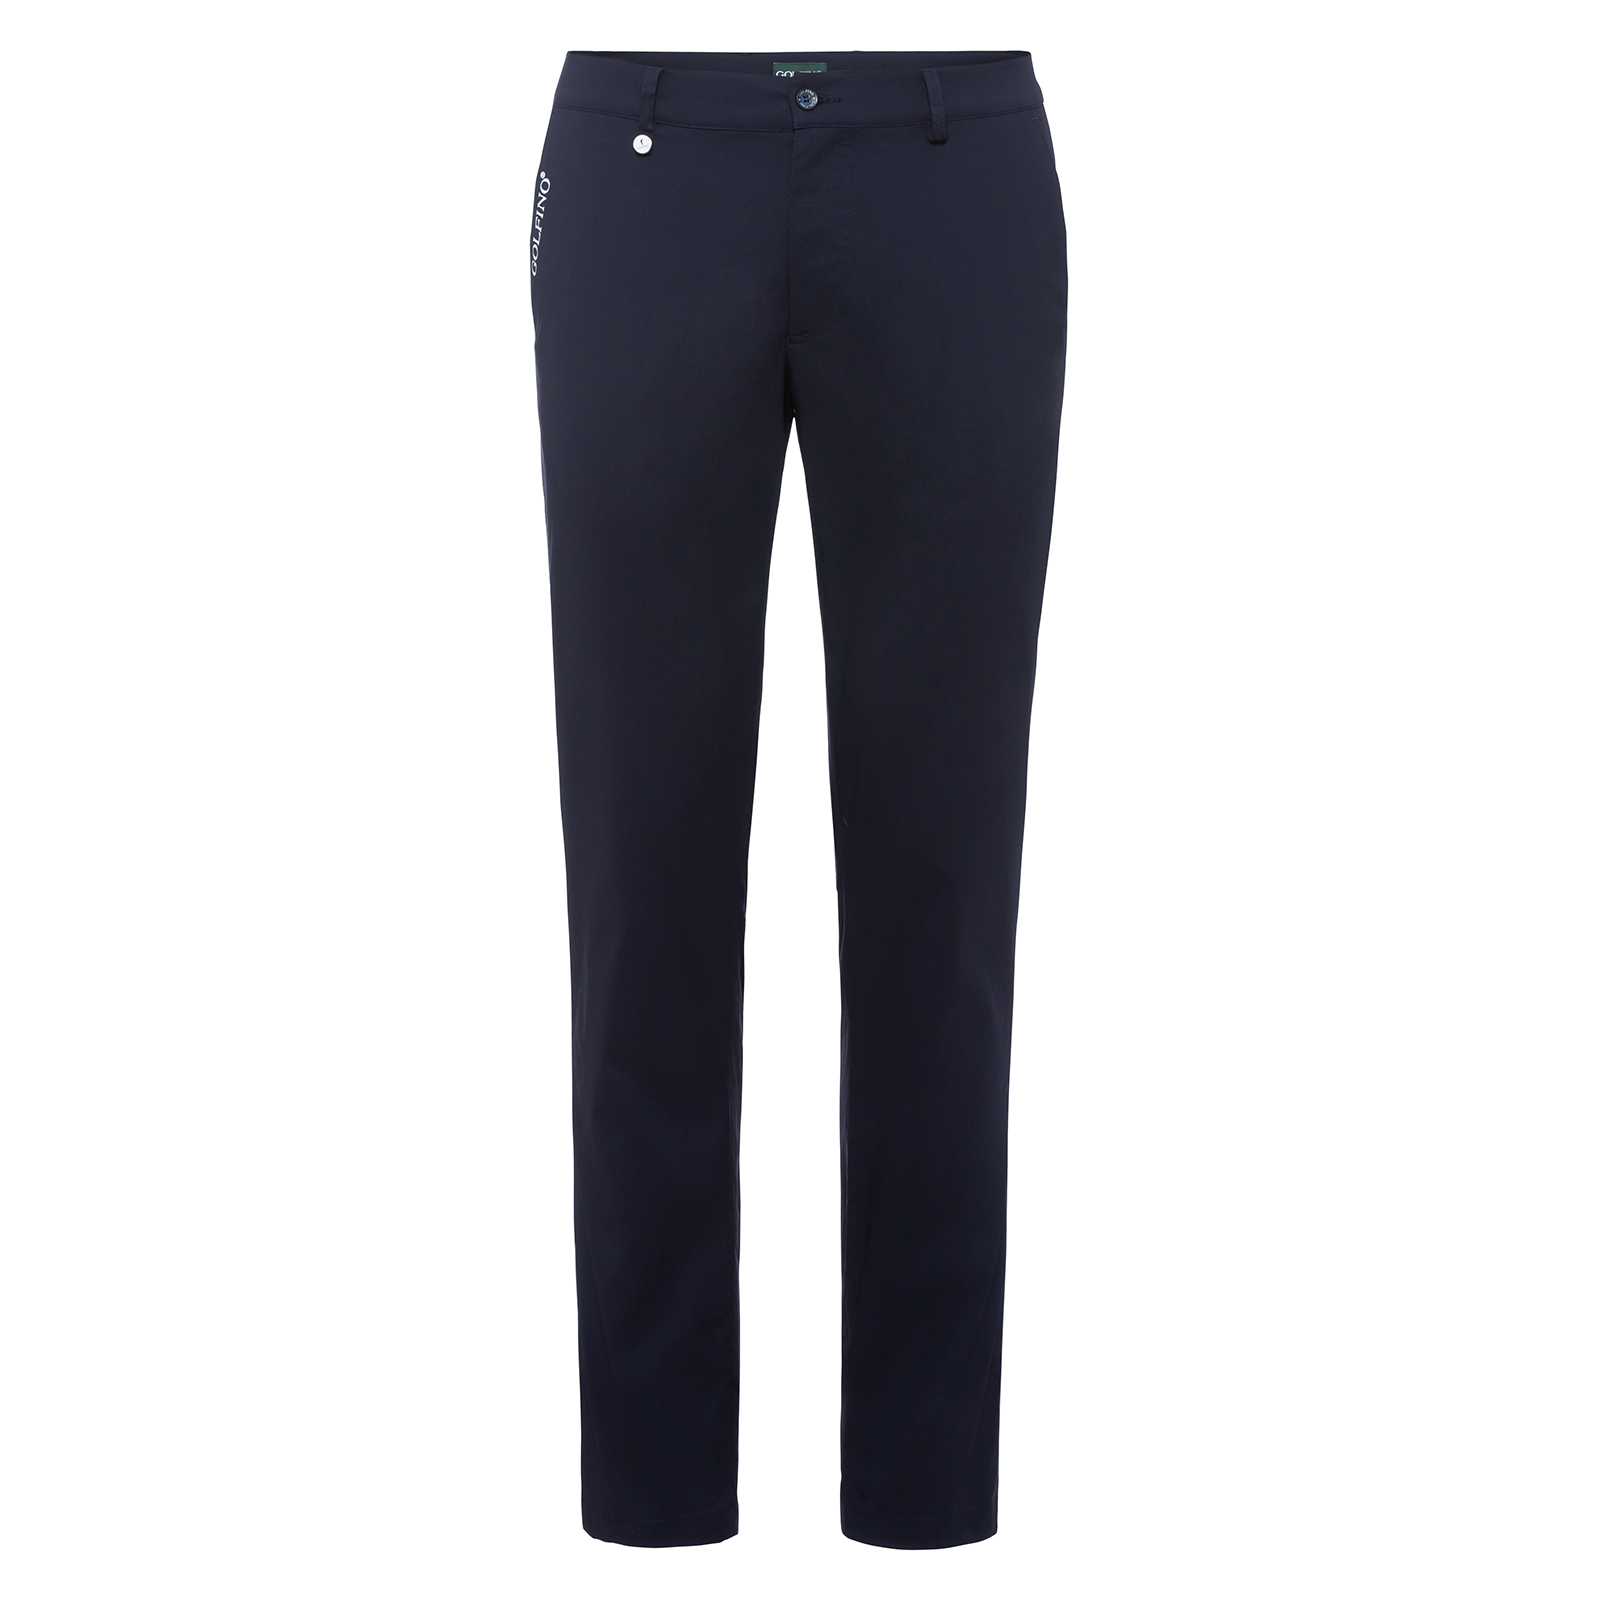 Men's golf trousers with stretch function 